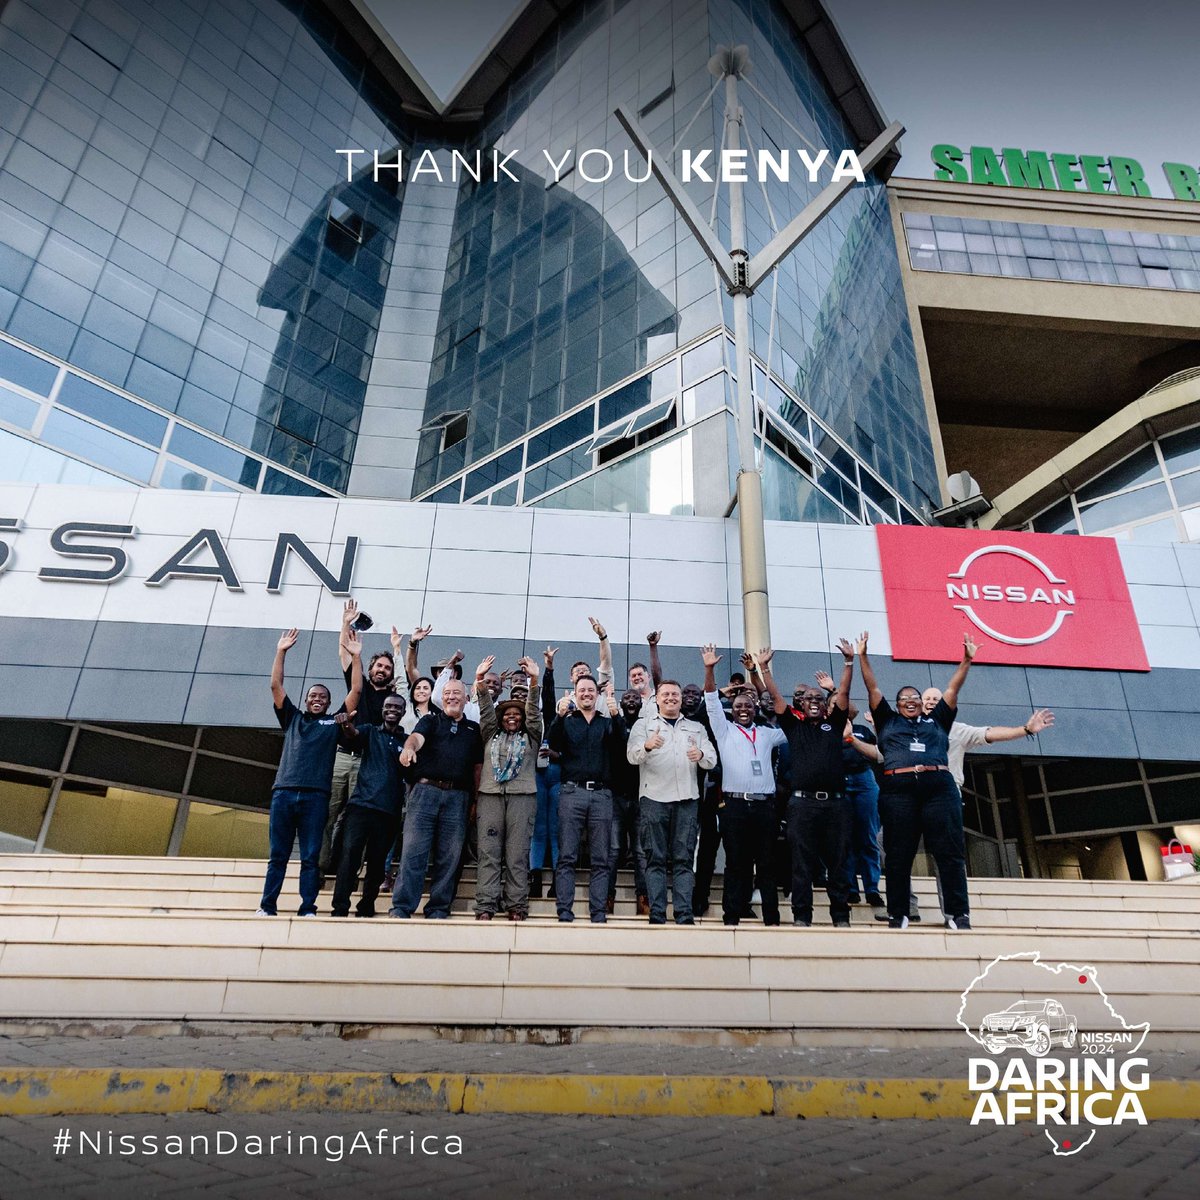 2/2 For more information about this journey and how you can become a part of it and win, visit nissanafrica.com/en/experience-… @Weg_Ry_en_Sleep #nissandaringafrica #nissannavara #daretomove